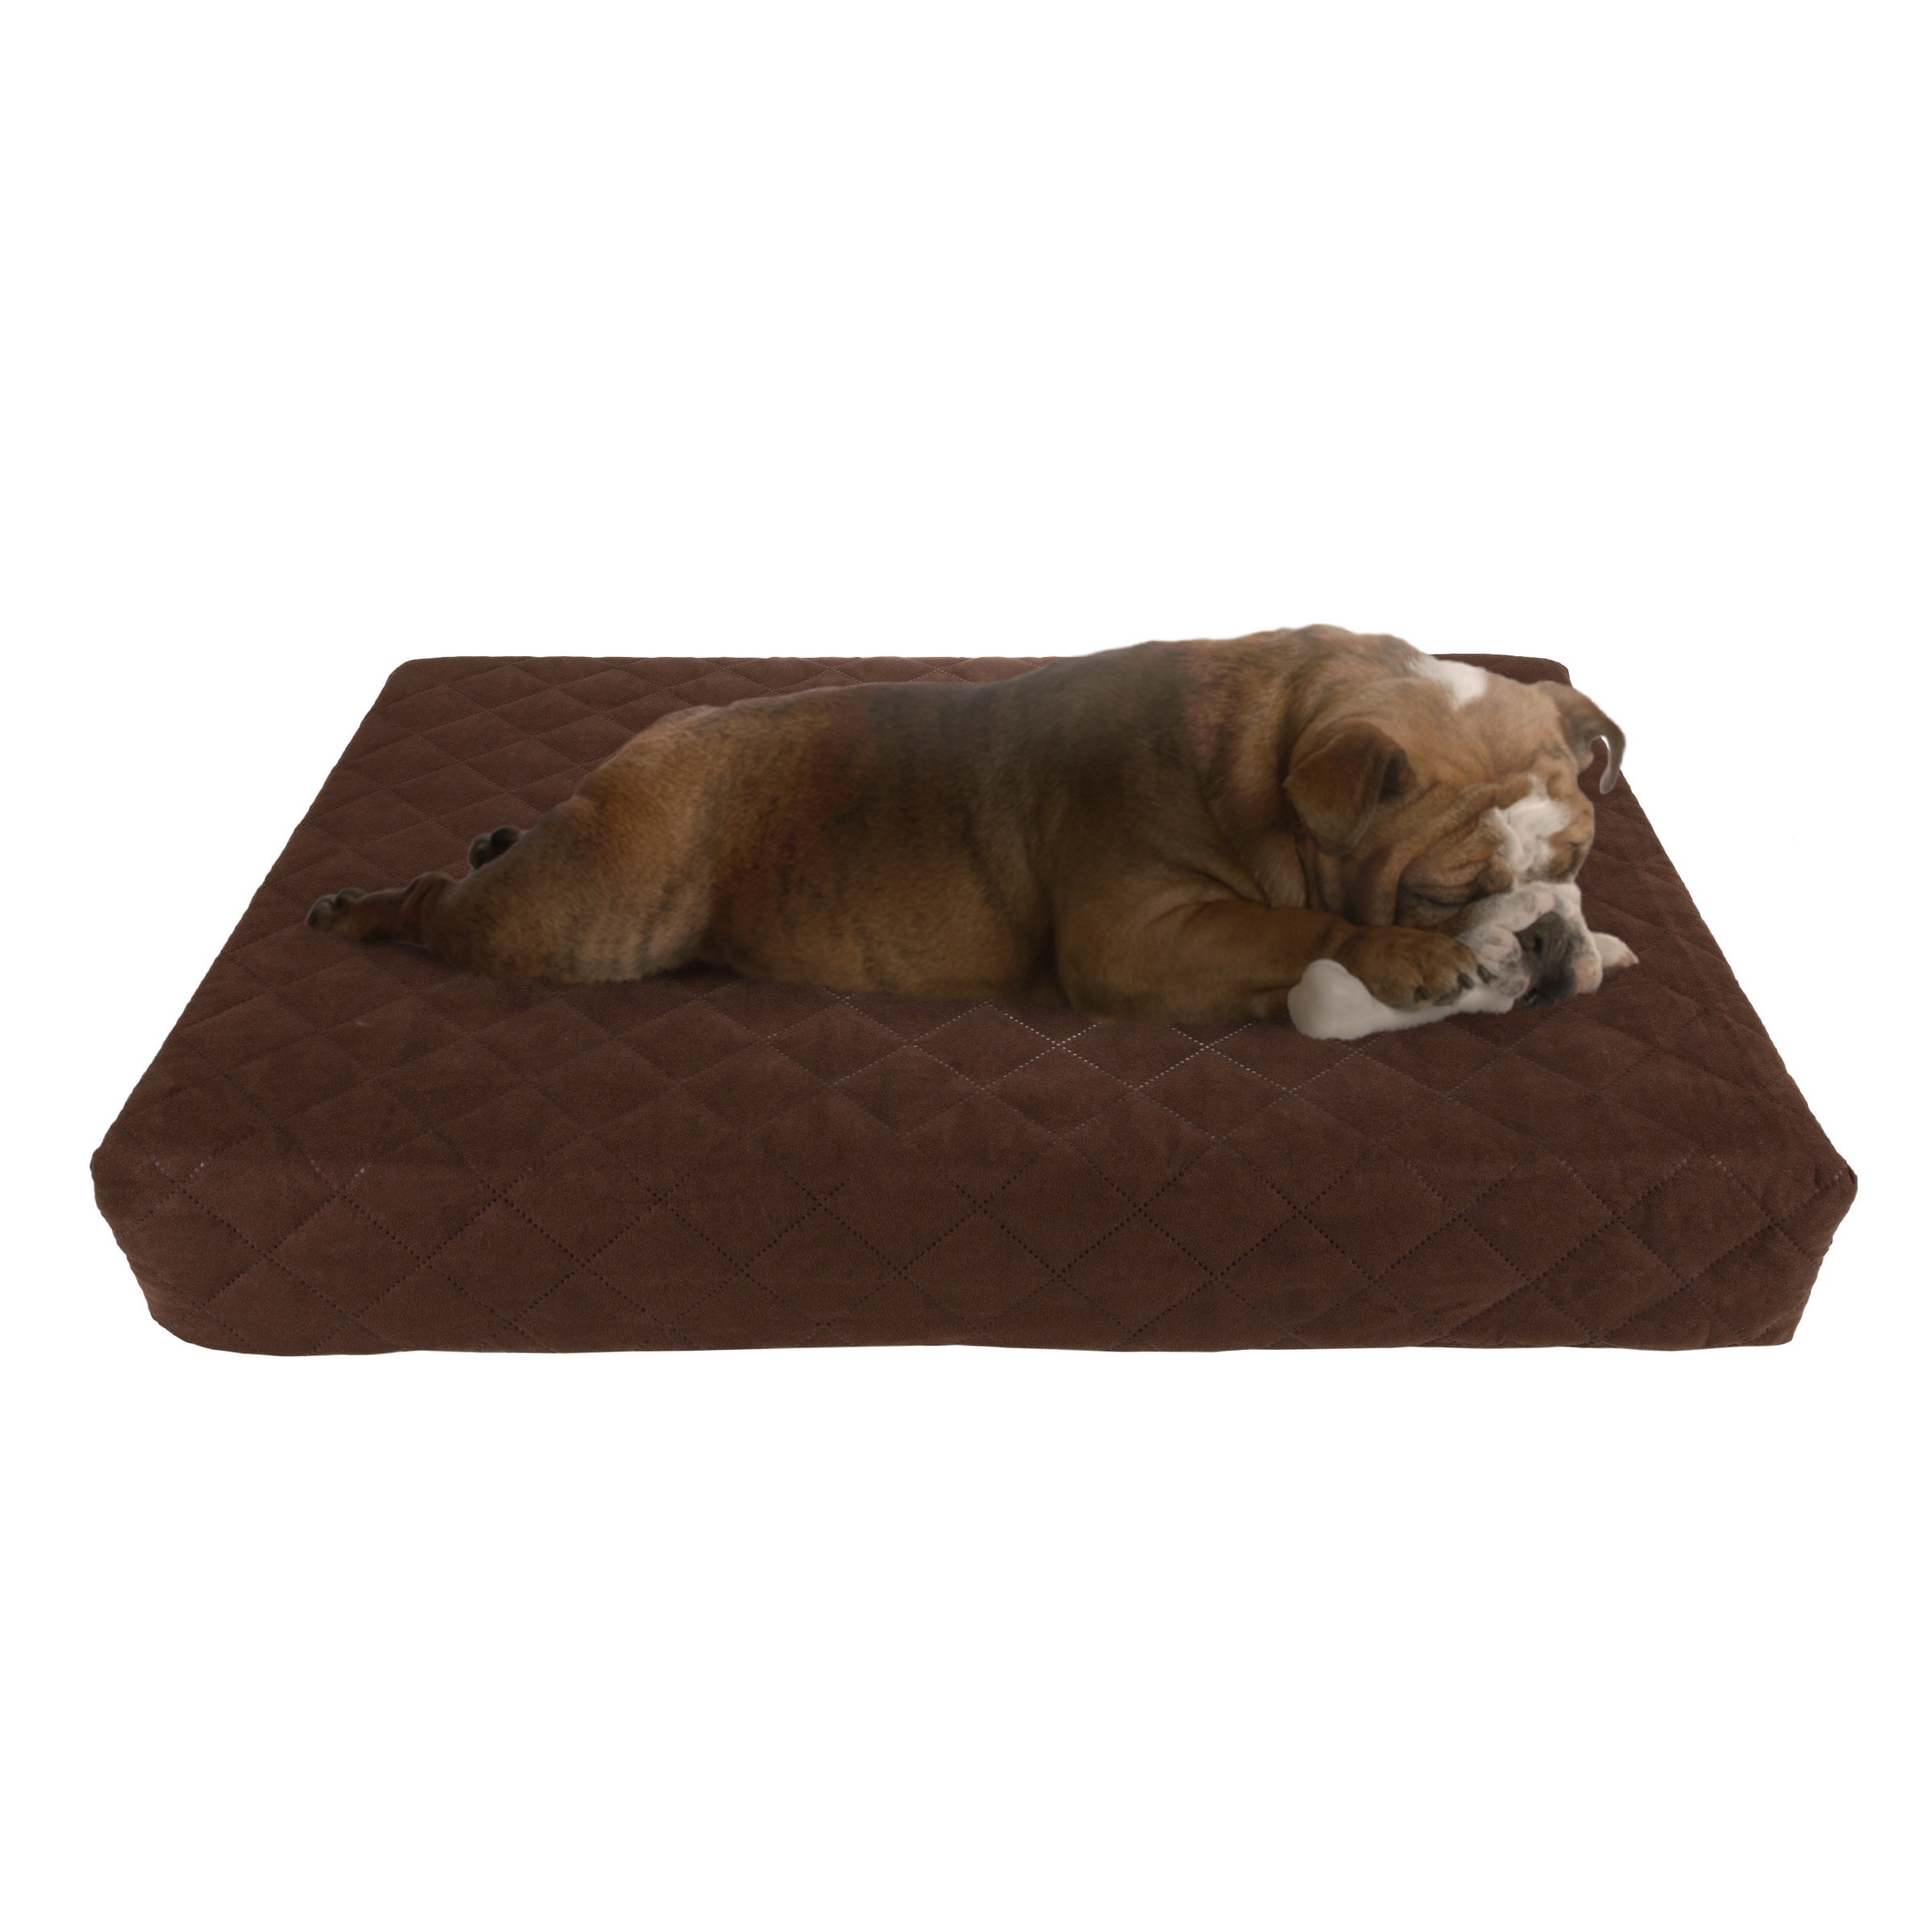 Waterproof Indoor Outdoor Memory Foam Orthopedic Small Medium Pet Dog Bed Removable Cover 20 X 30 Inches